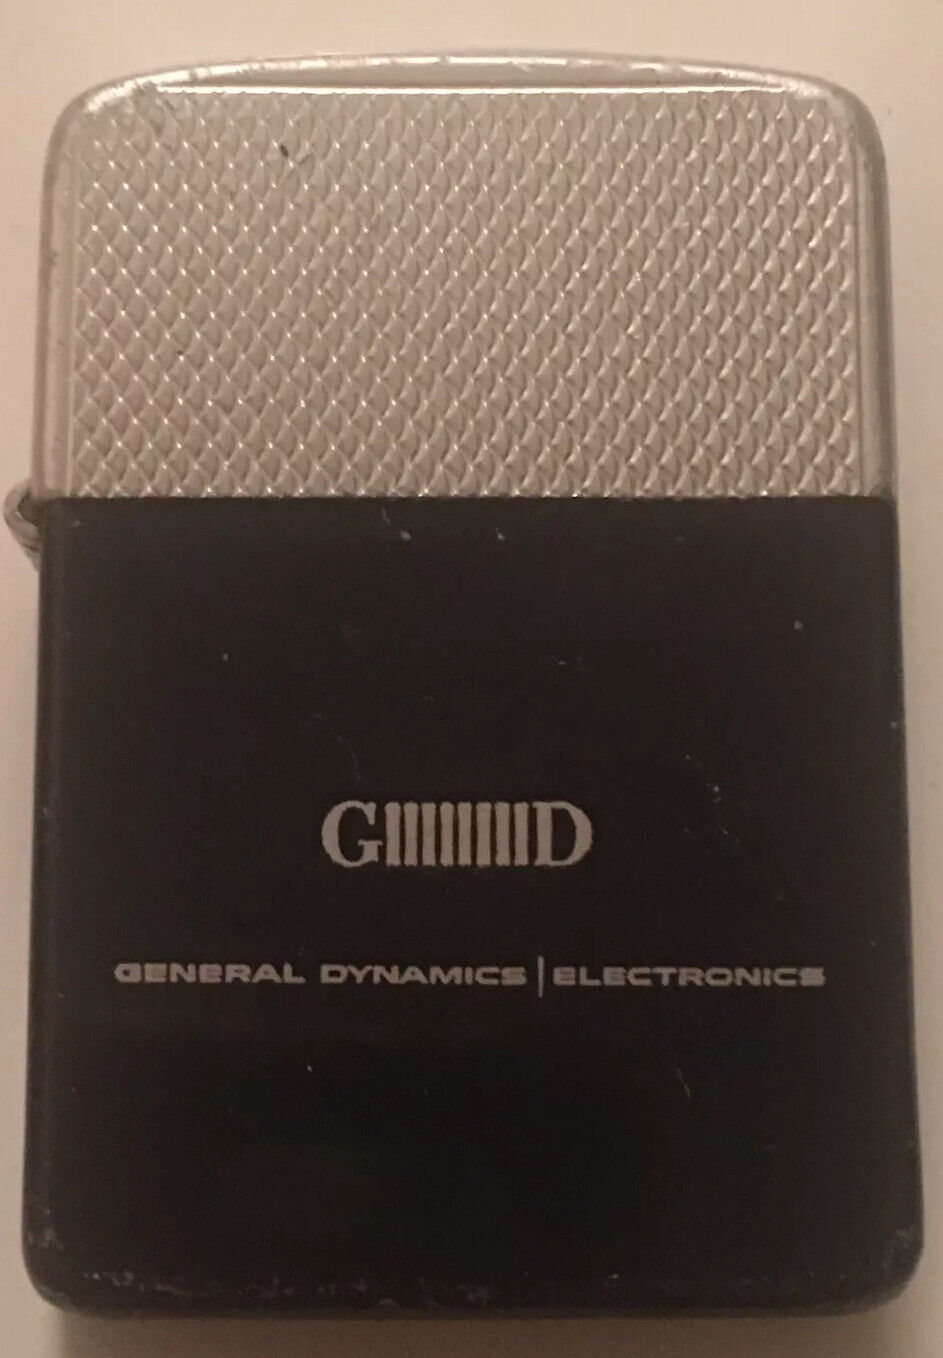 General Dynamics Electronics Lighter By Park Industries Tennessee Made In USA